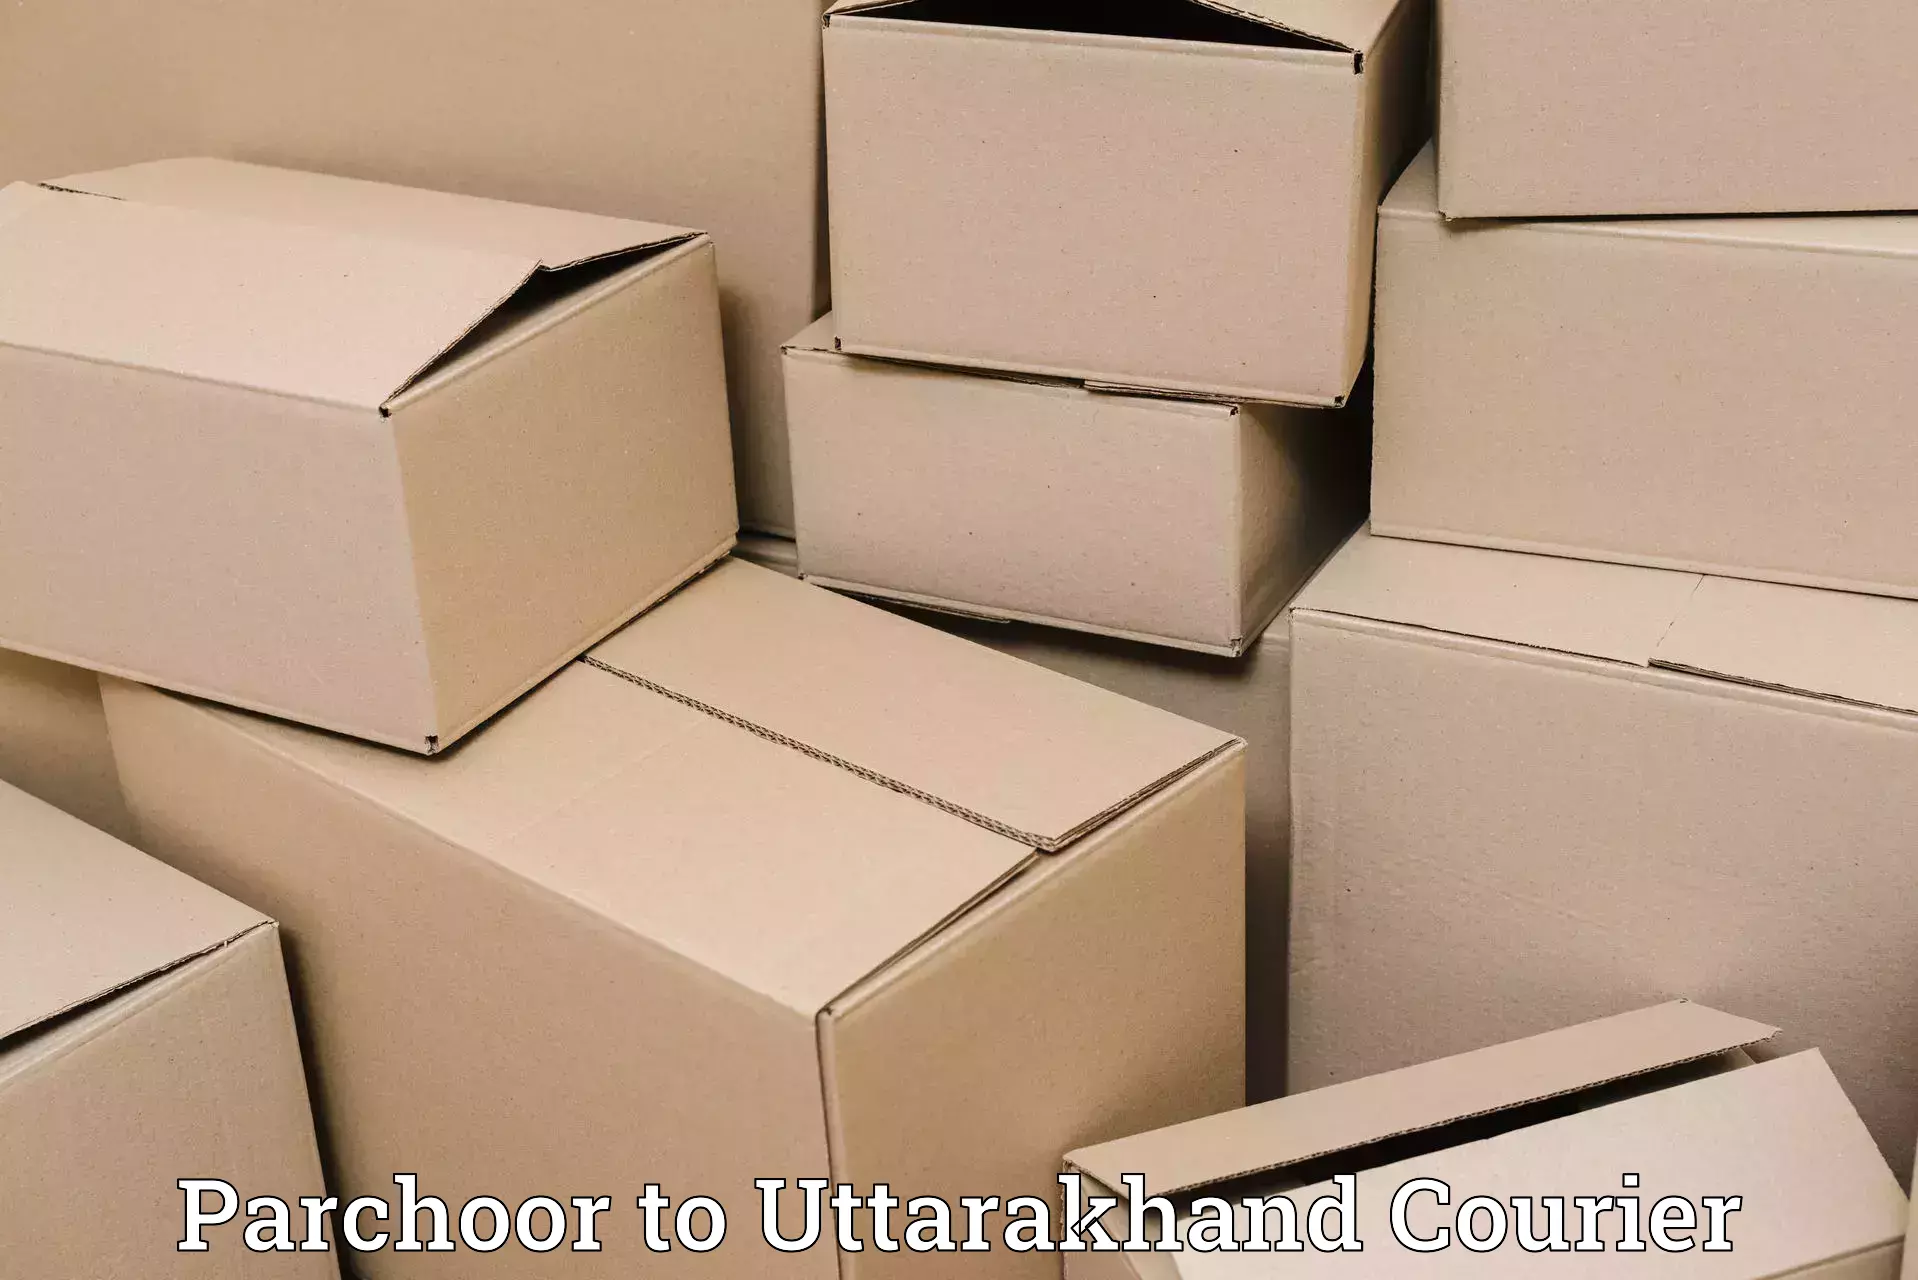 Global shipping solutions in Parchoor to Bhimtal